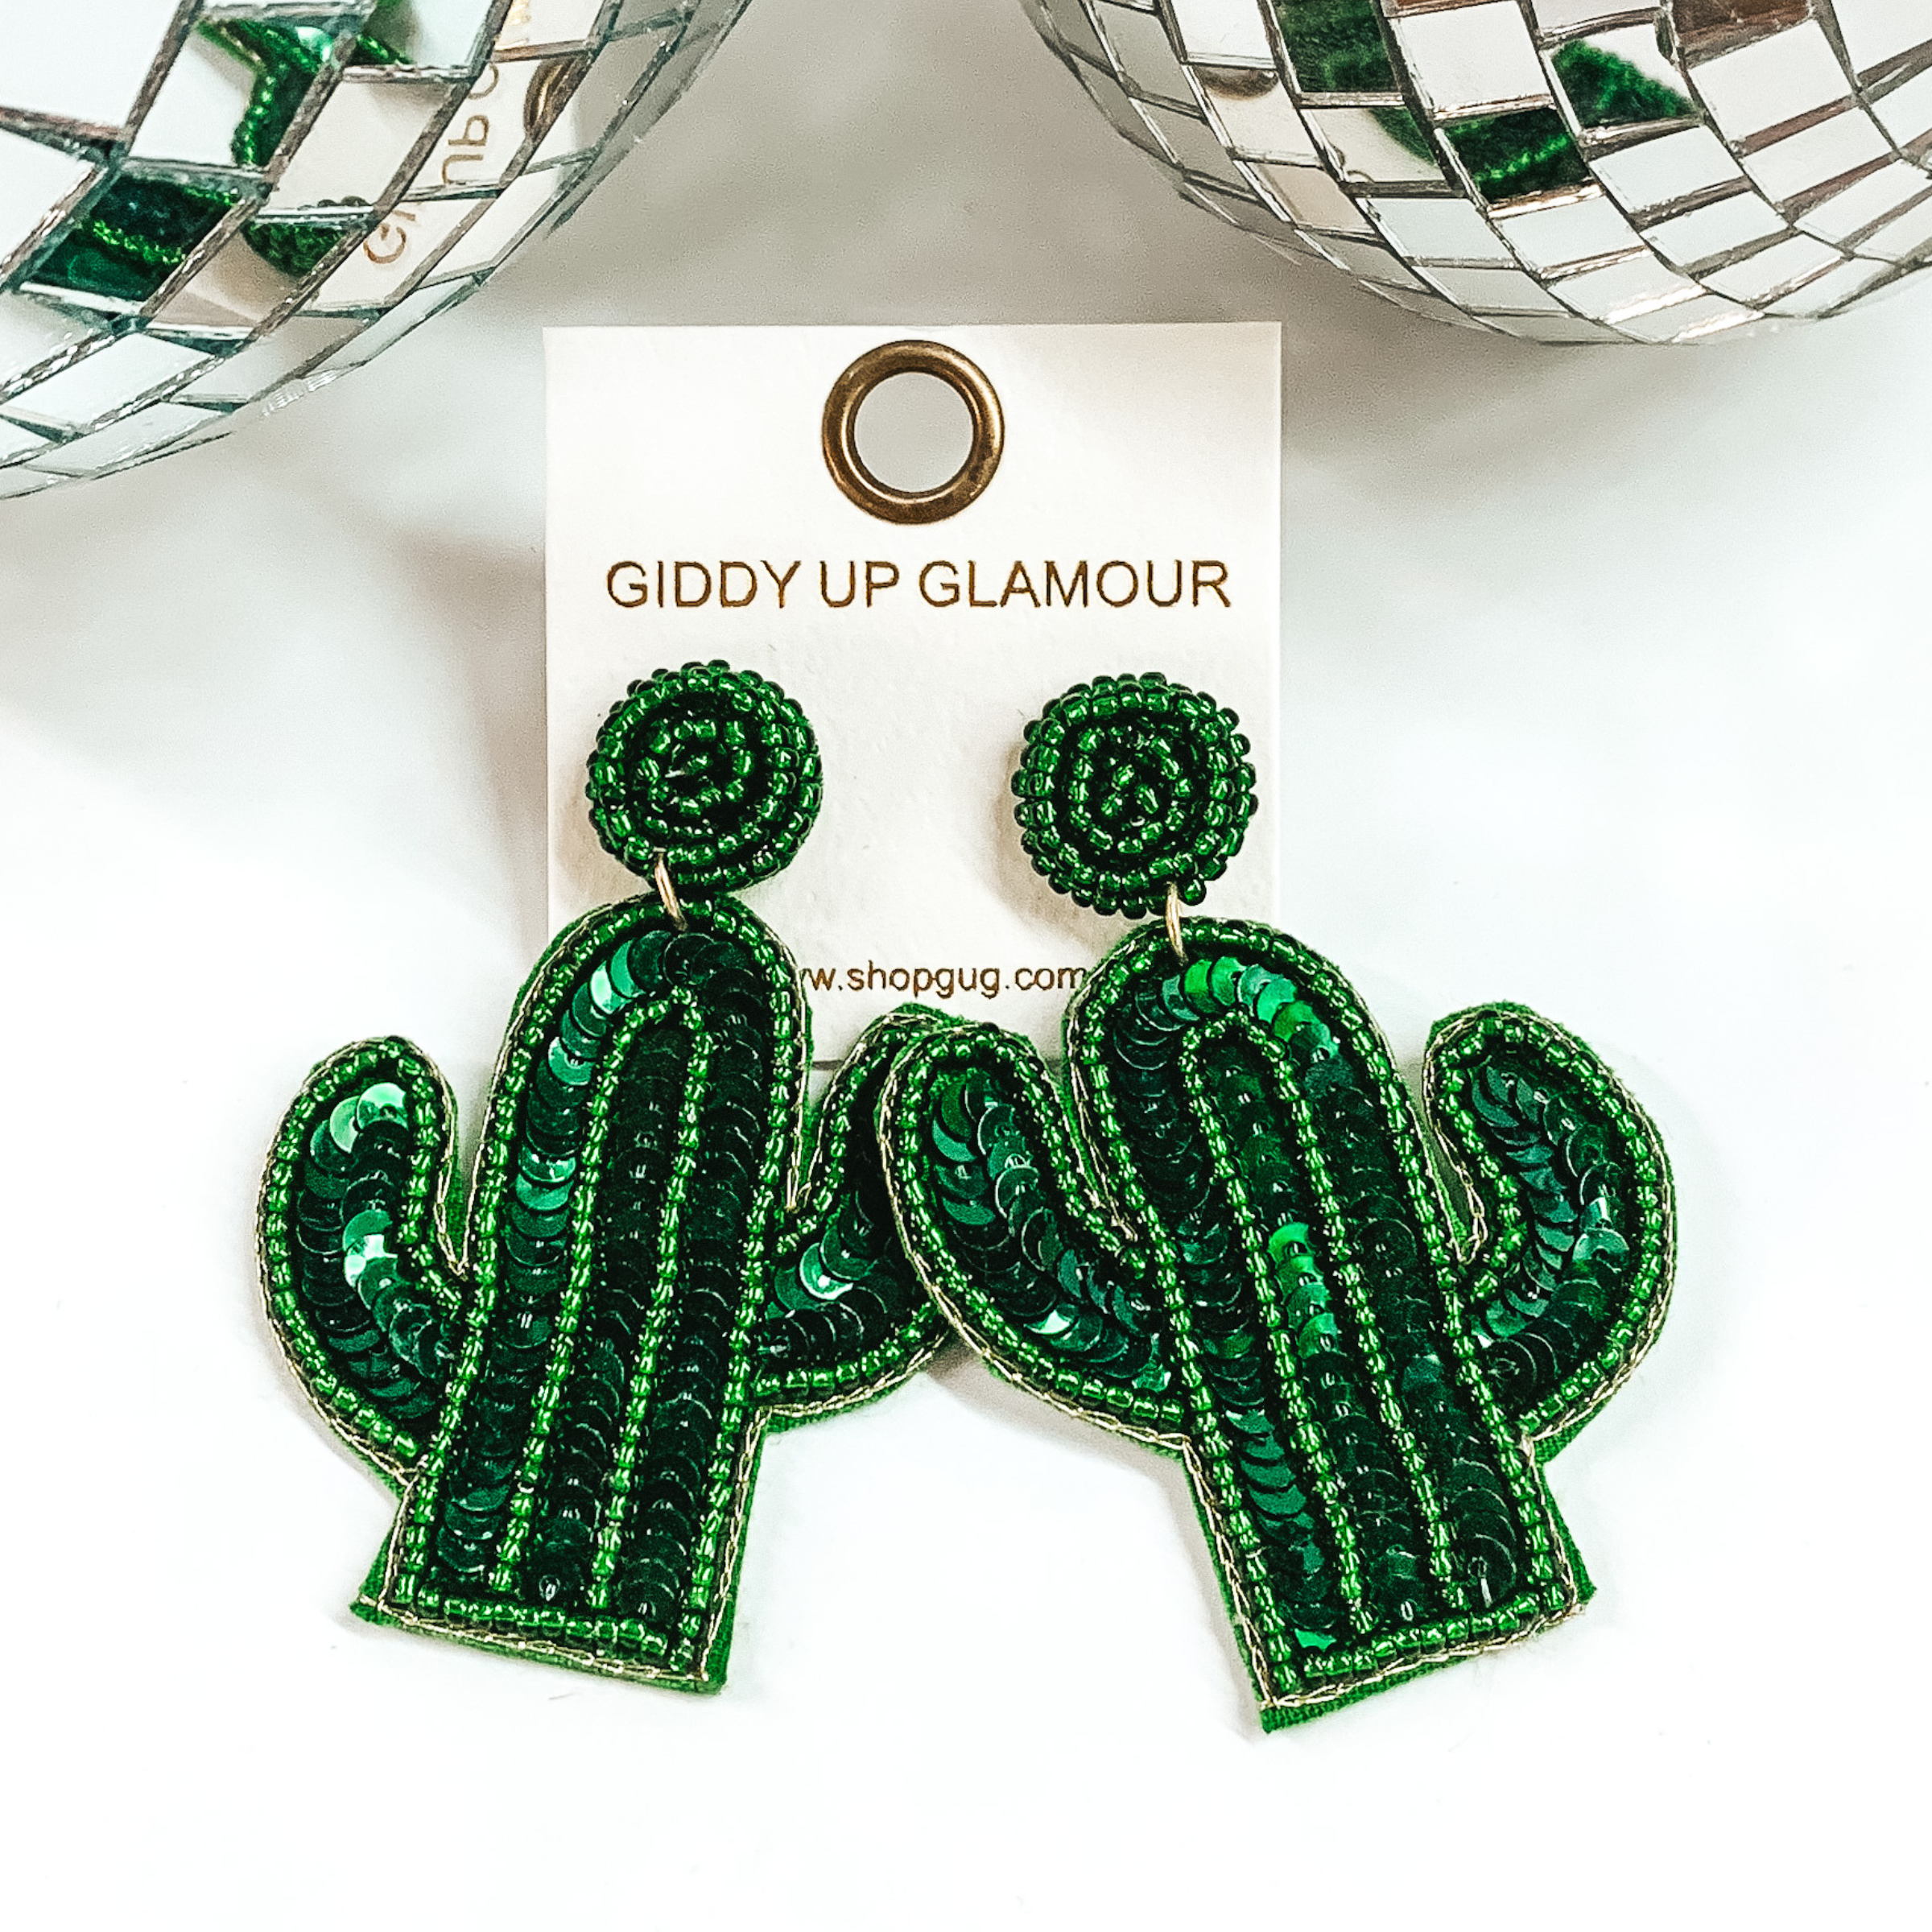 Green sequein cactus earrings with a green beaded outline. These earrings are pictured on a white background with disco balls at the top. 